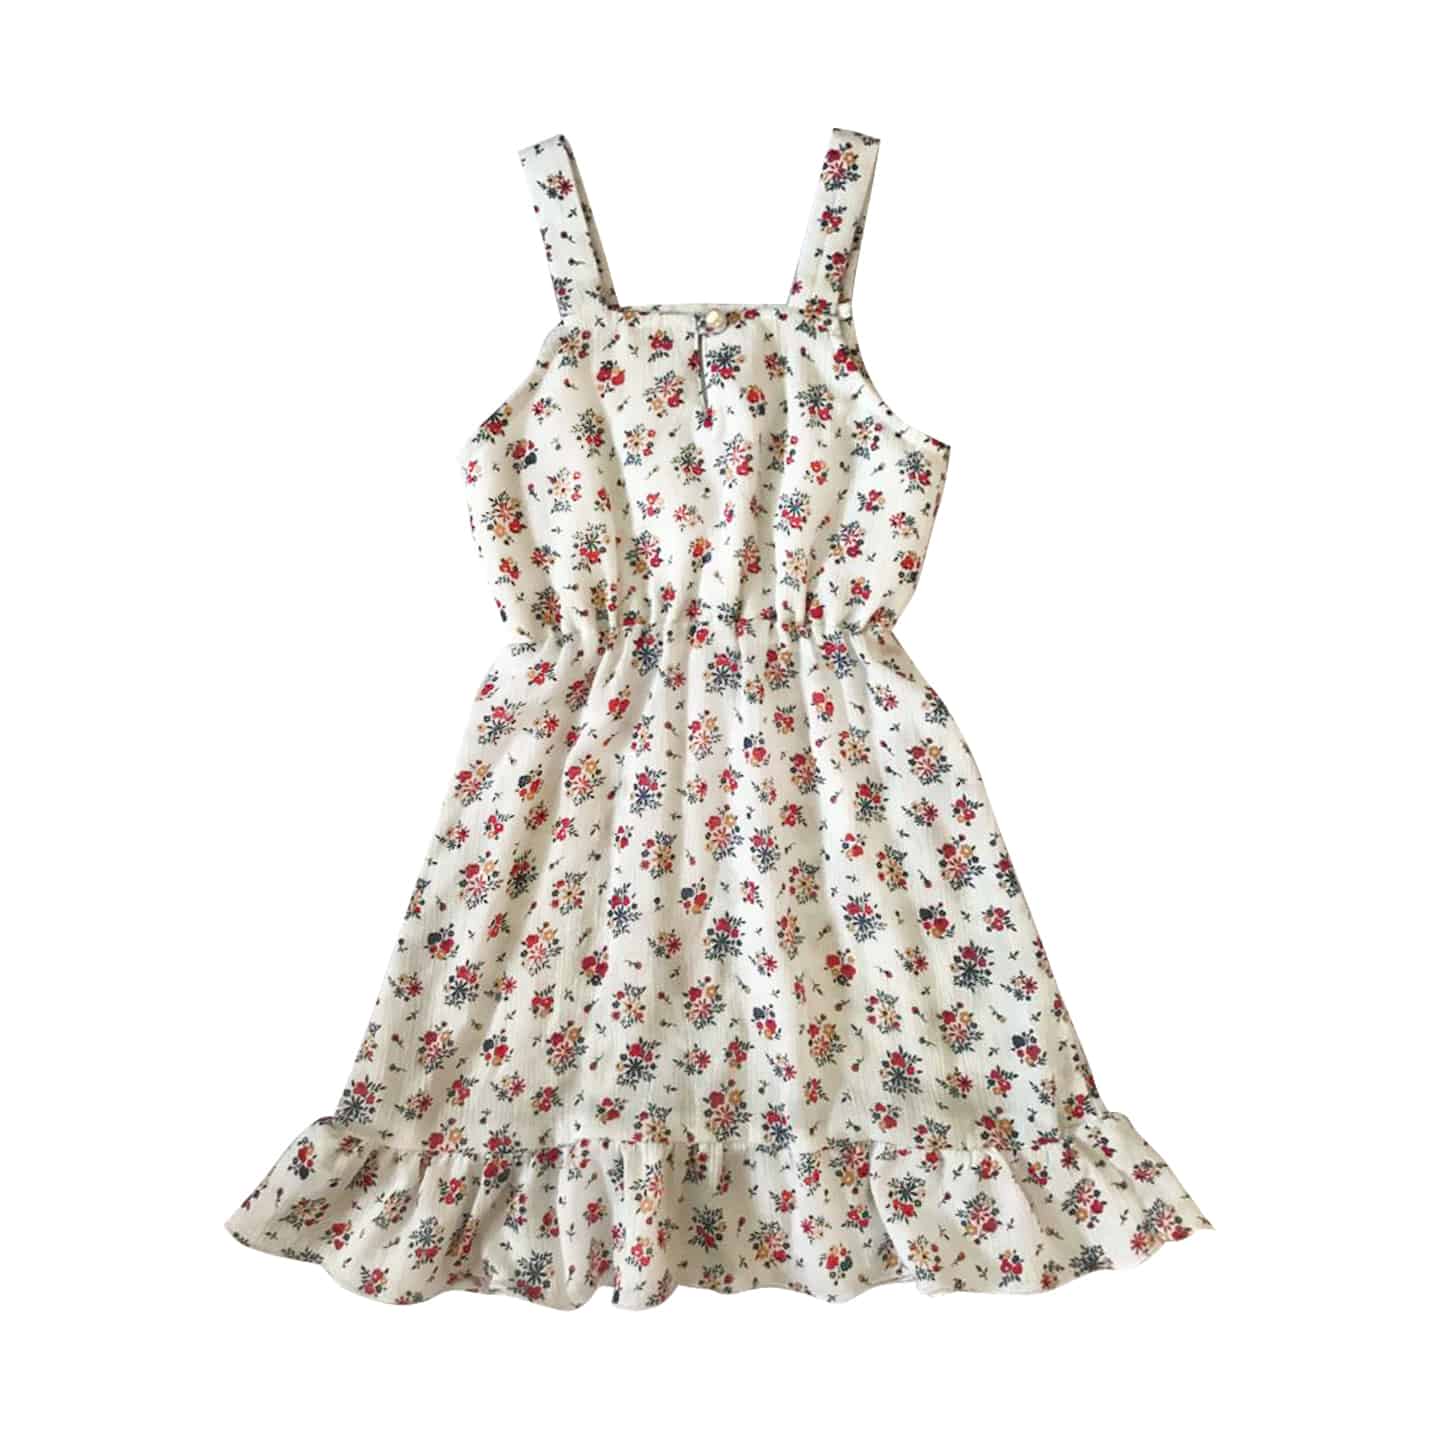 Cute floral print dress with ruffle in bottom-RKFCW84